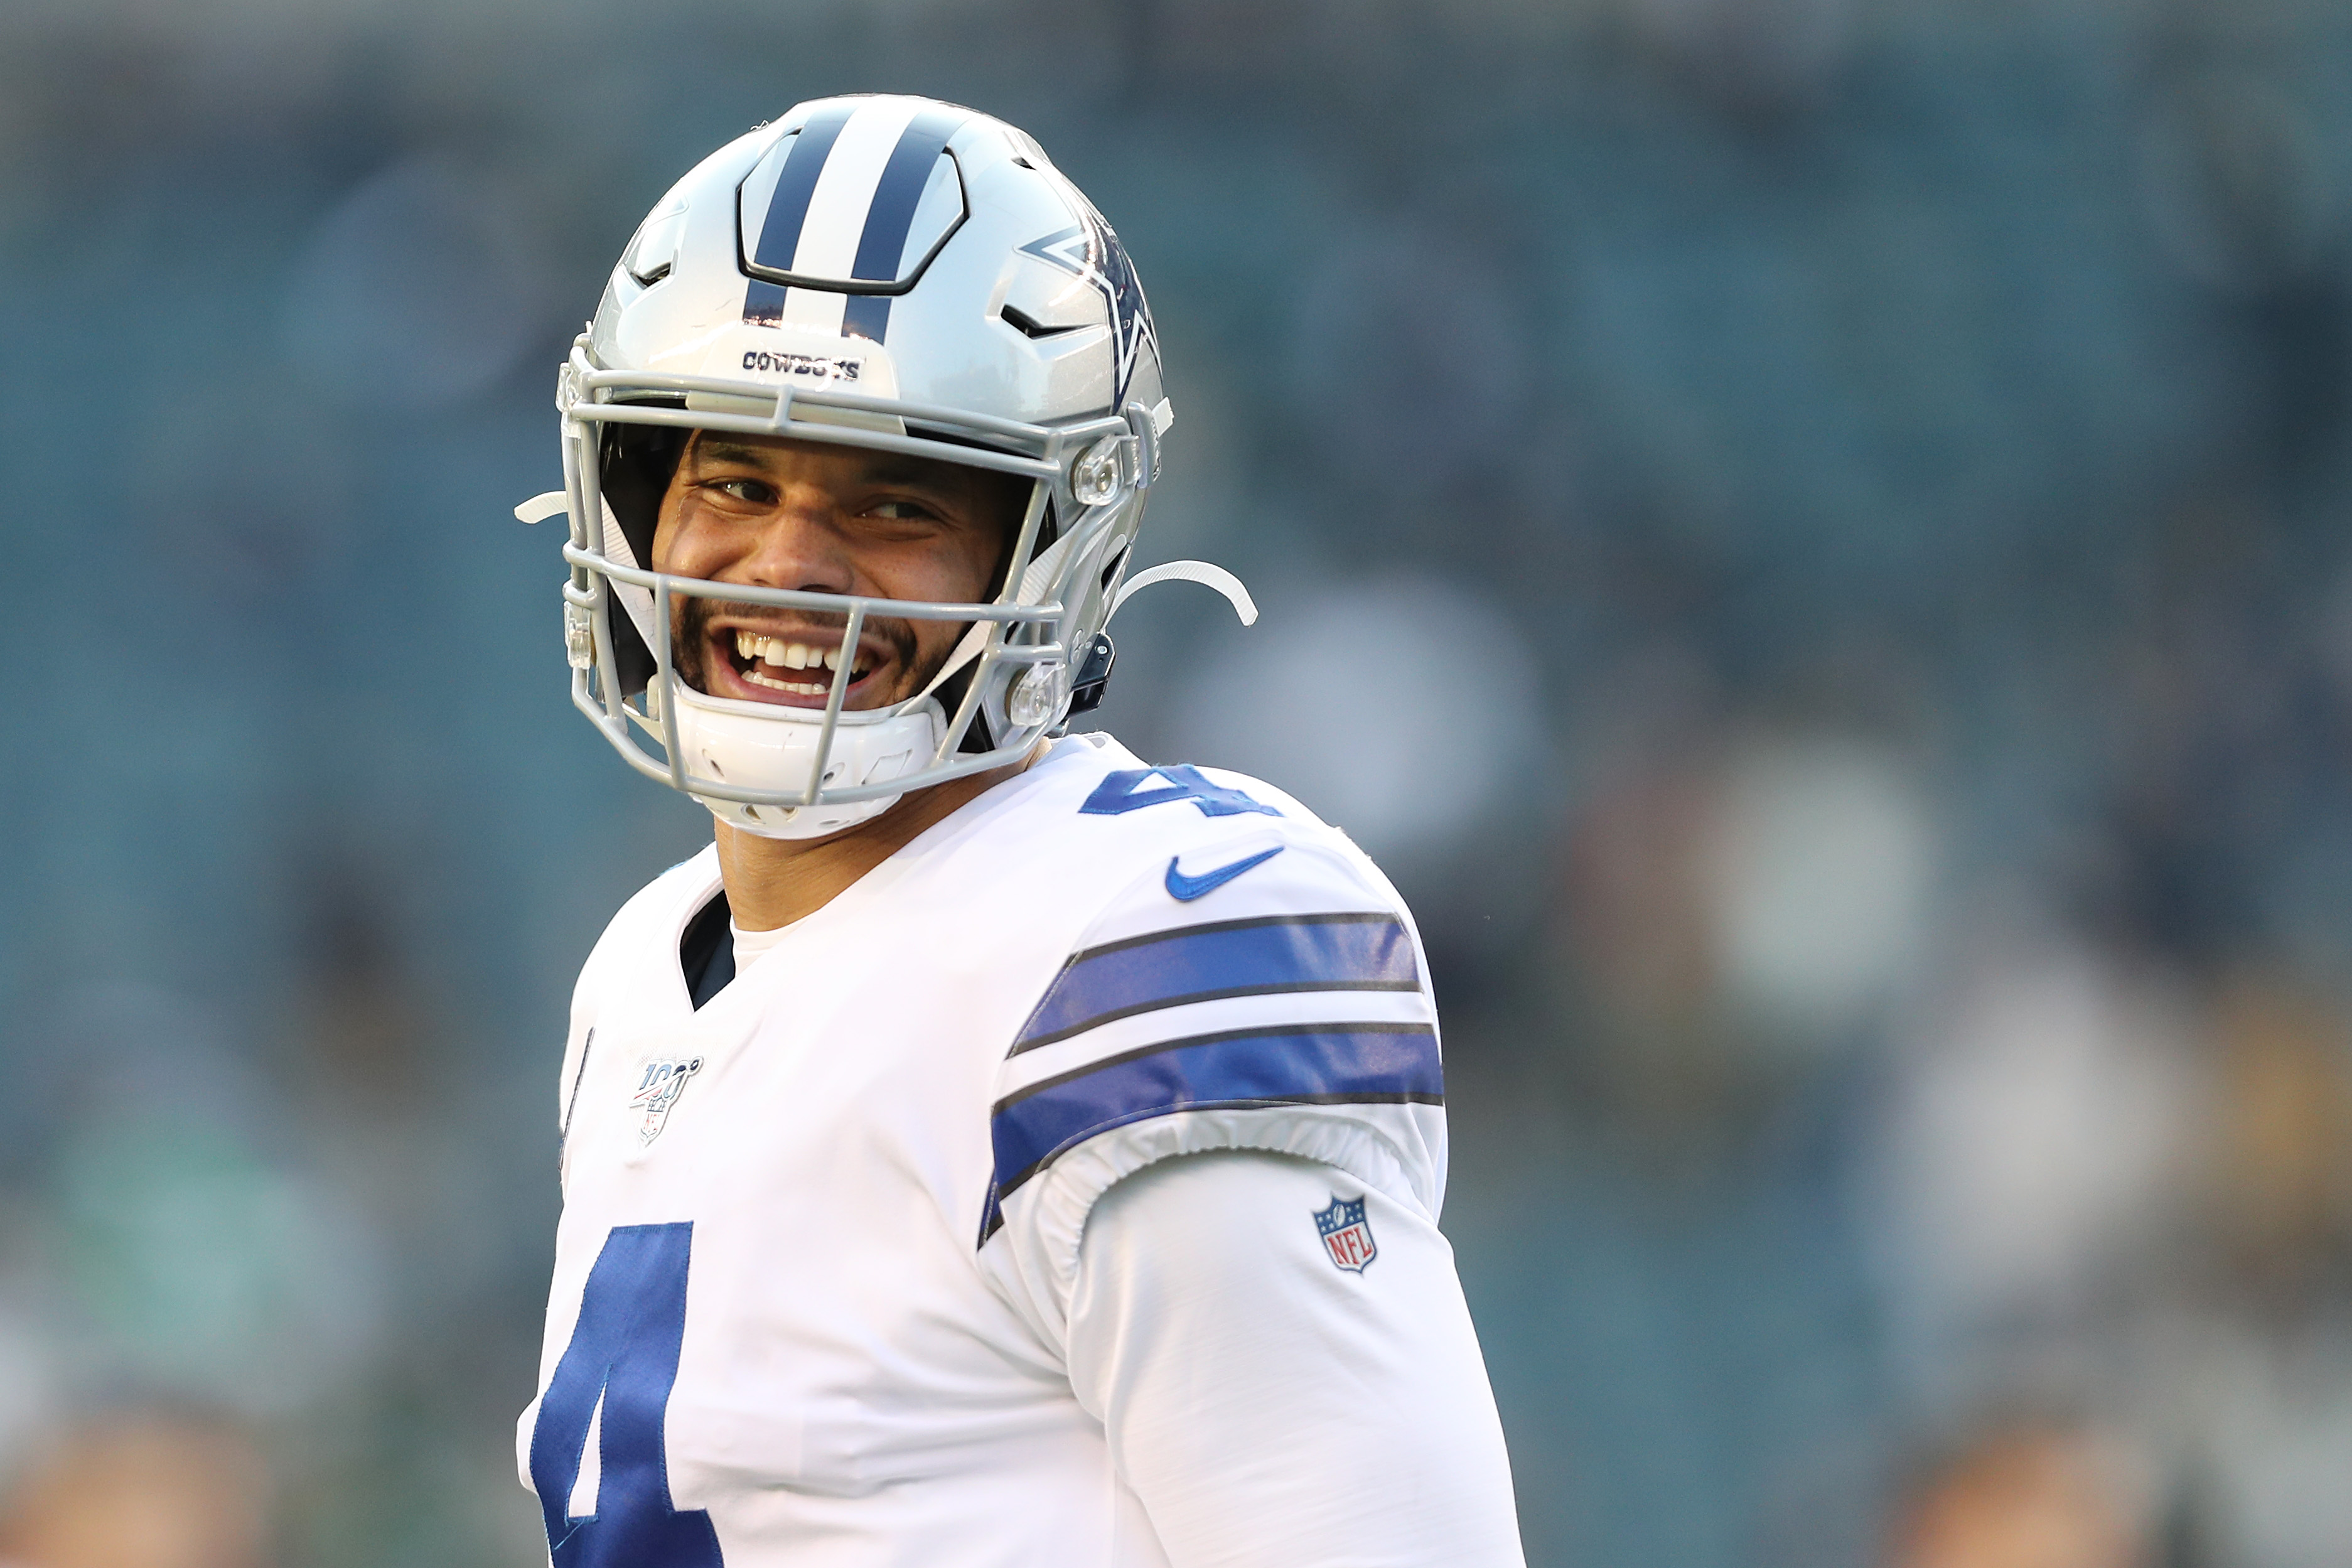 Dak Prescott finally signed his franchise tag worth $31.4 million in 2020, but does that make him the highest-paid Dallas Cowboy ever?